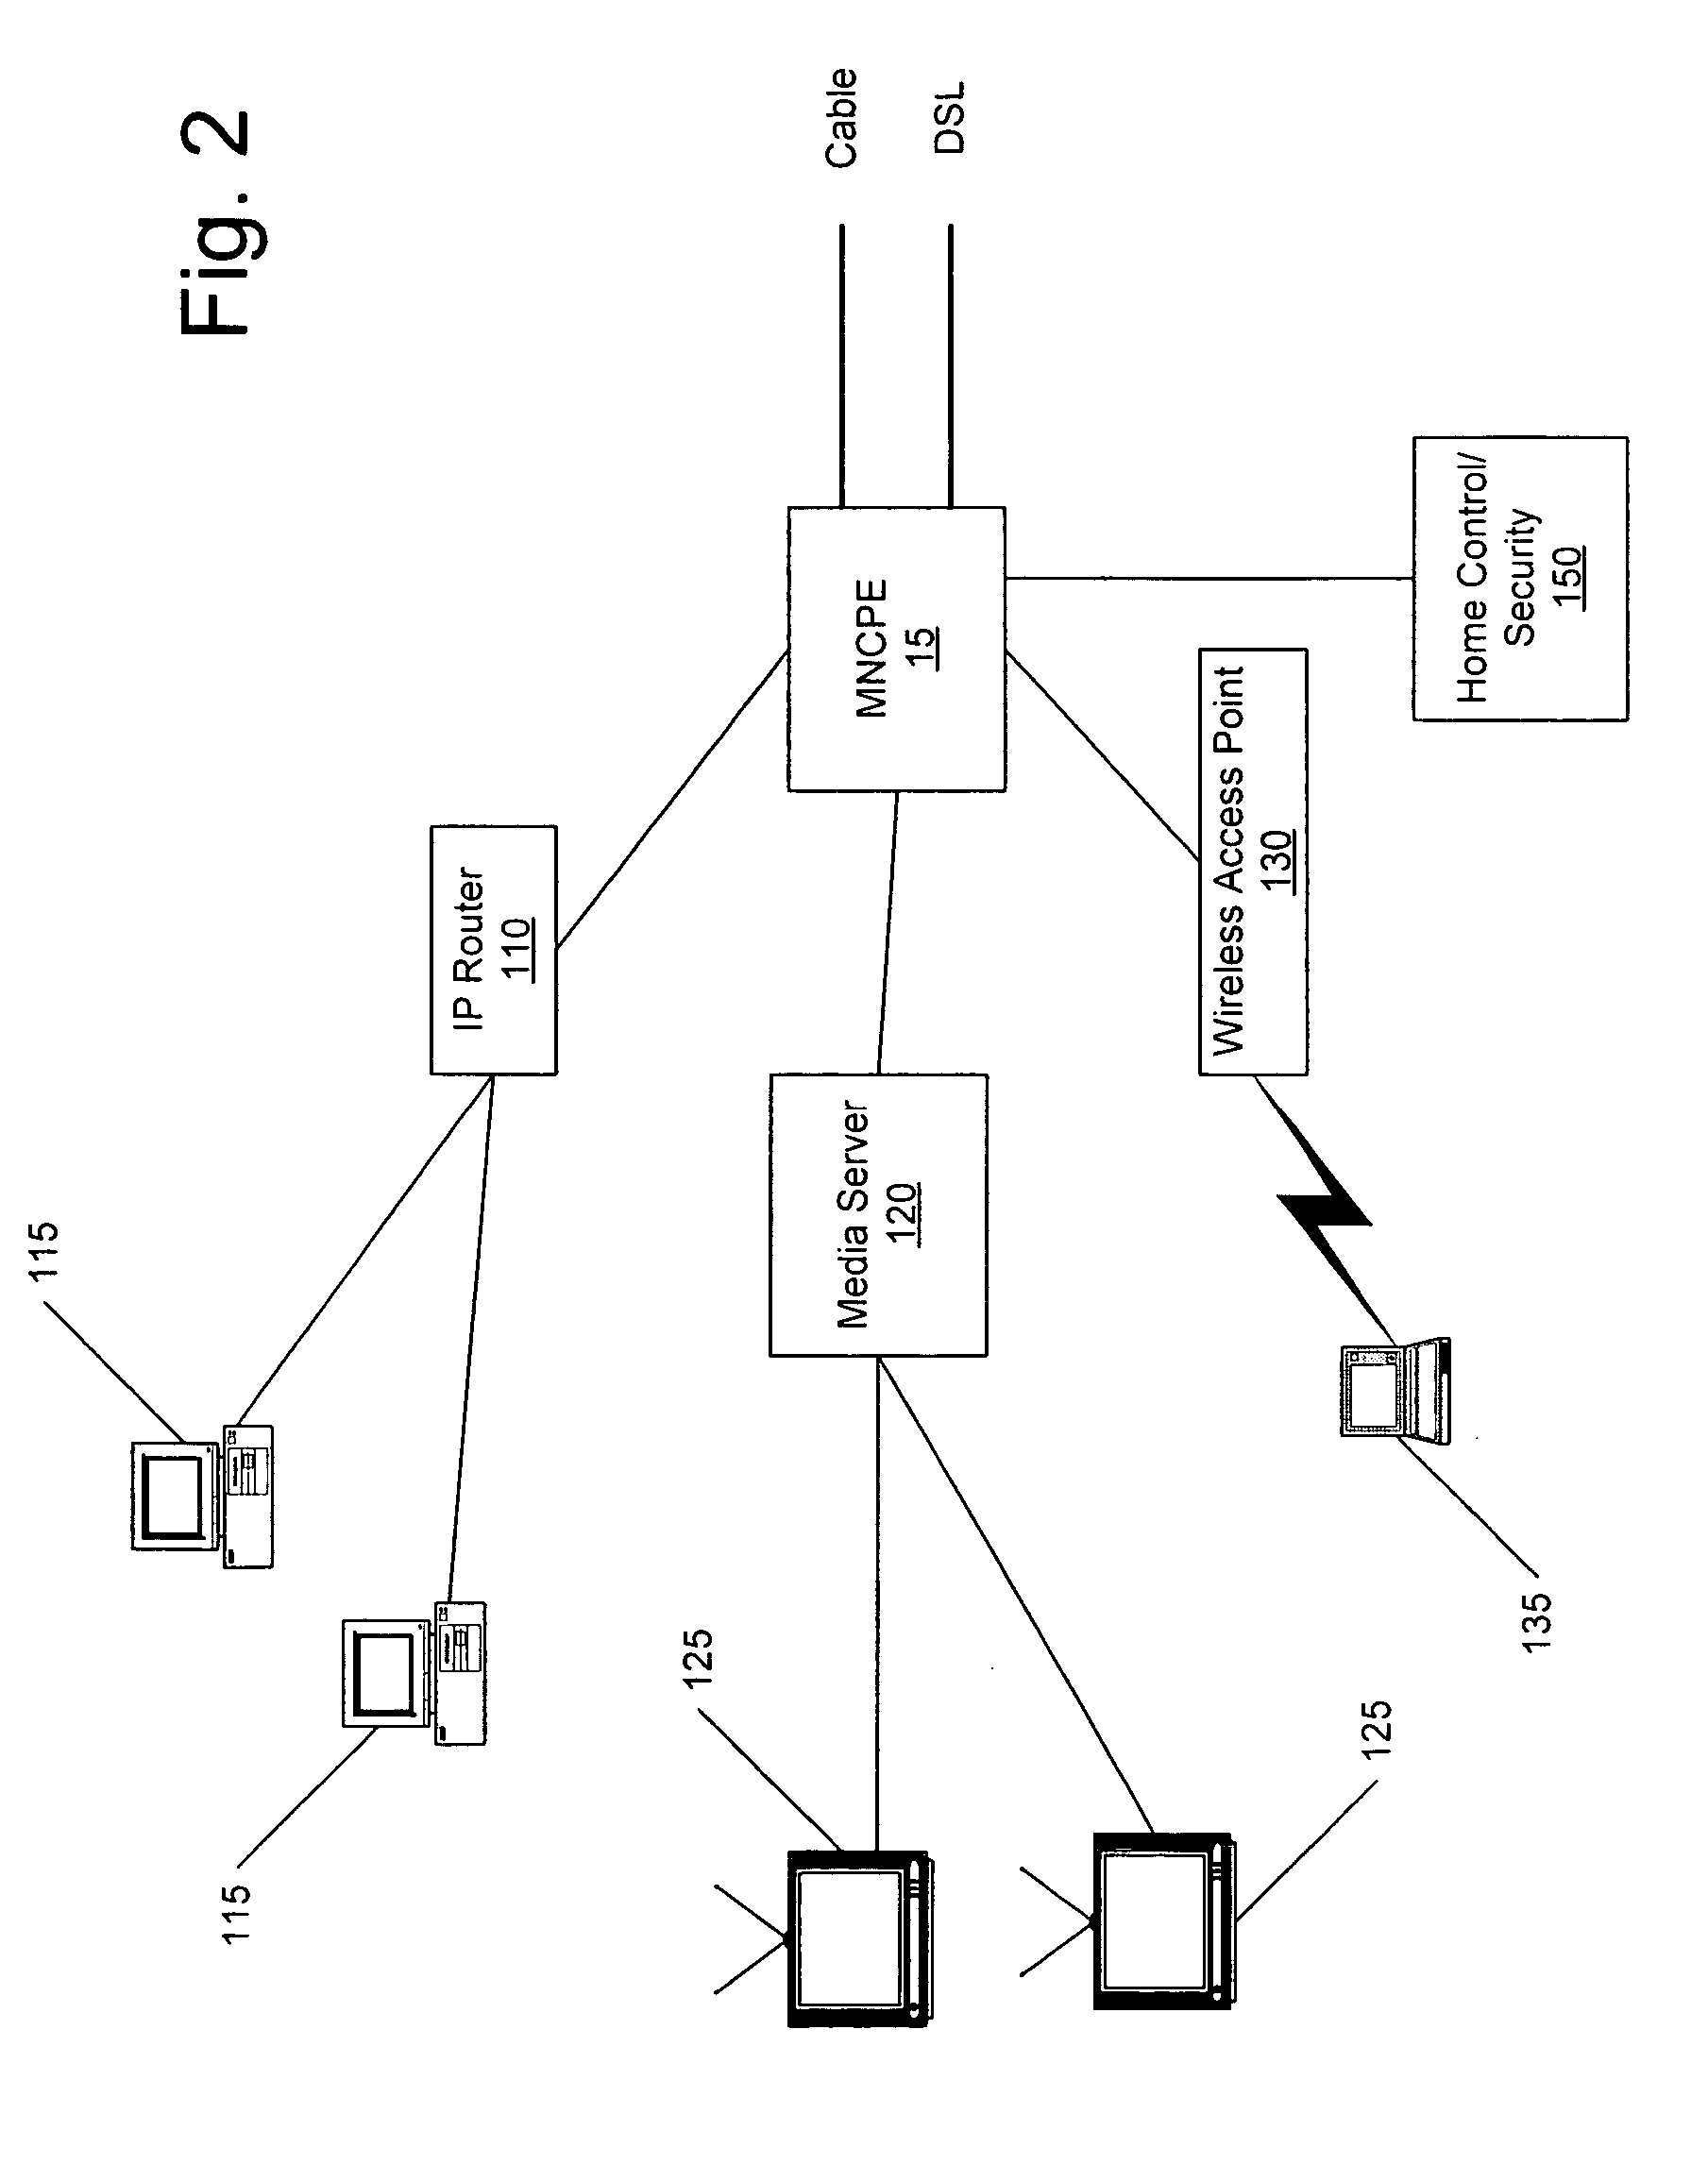 Coordinated multi-network data services